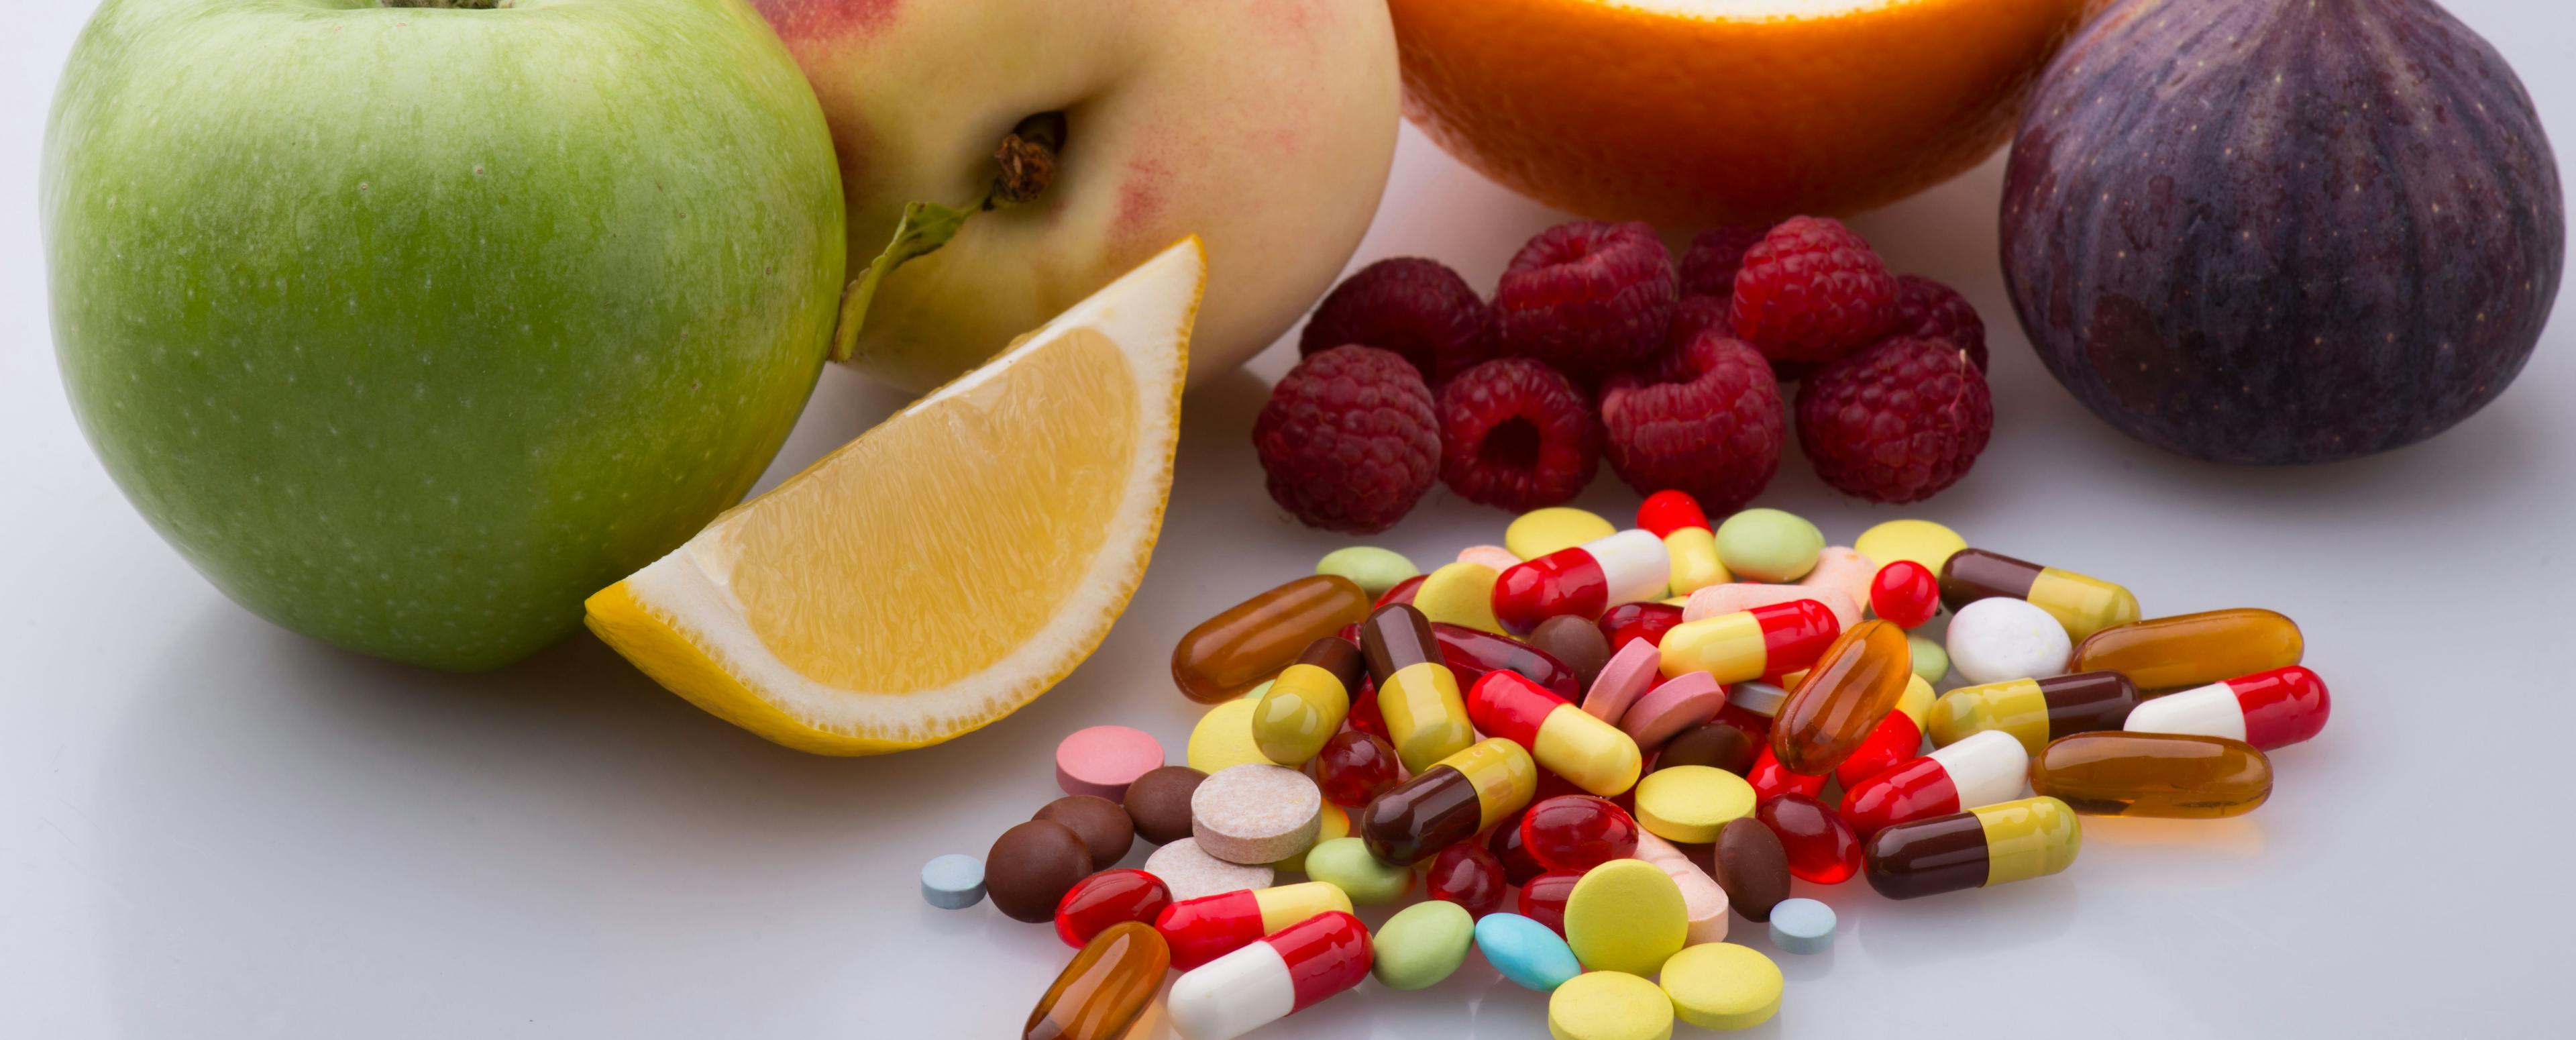 Making Time to Ask About Dietary Supplements